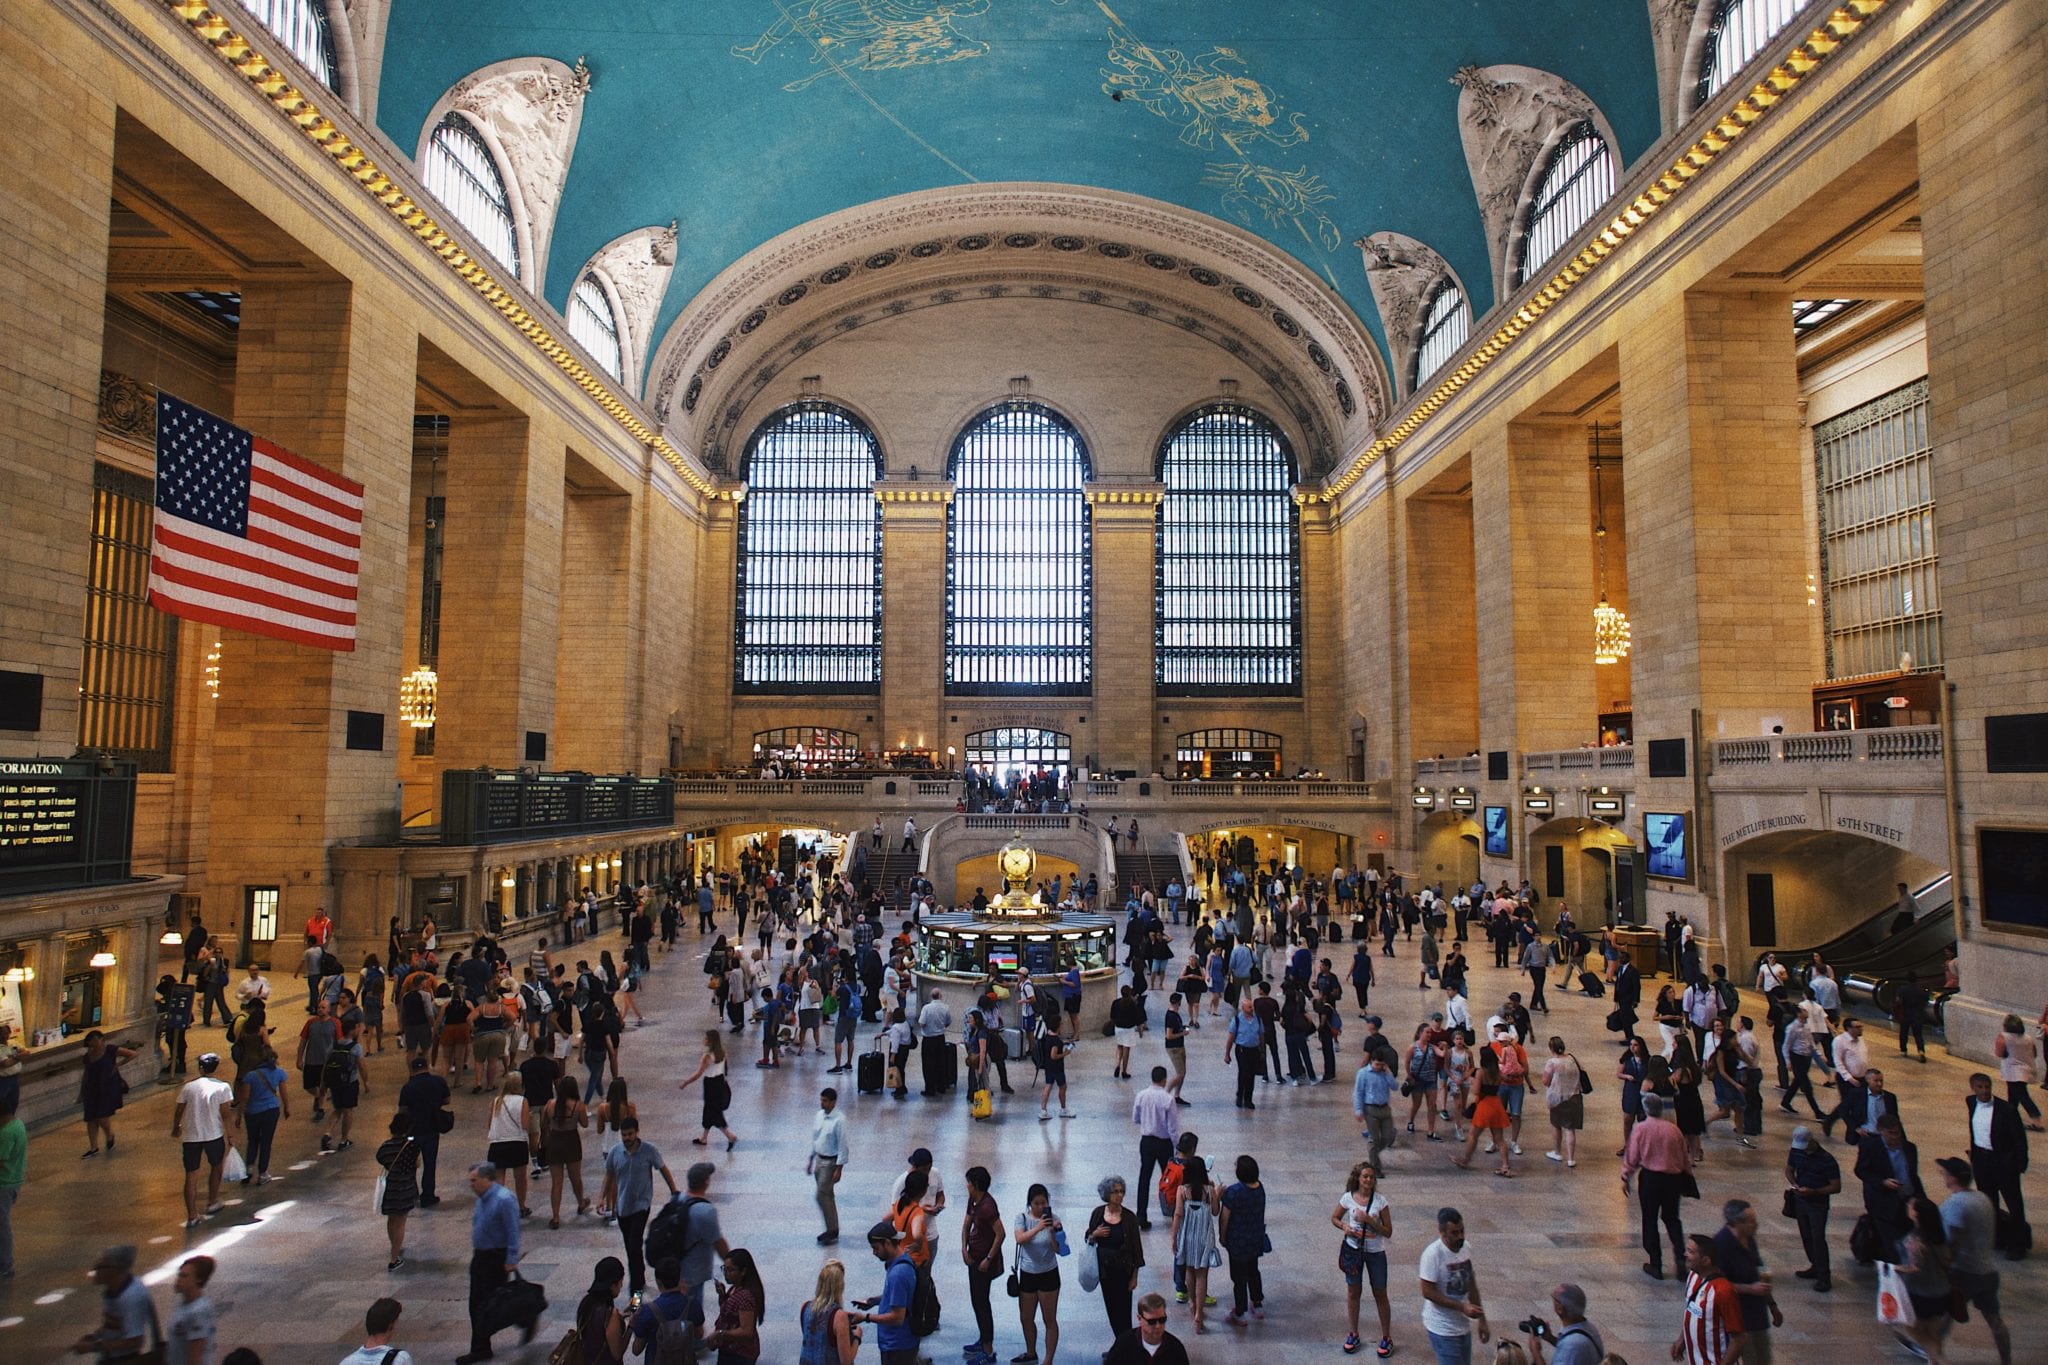 Grand Central in New York